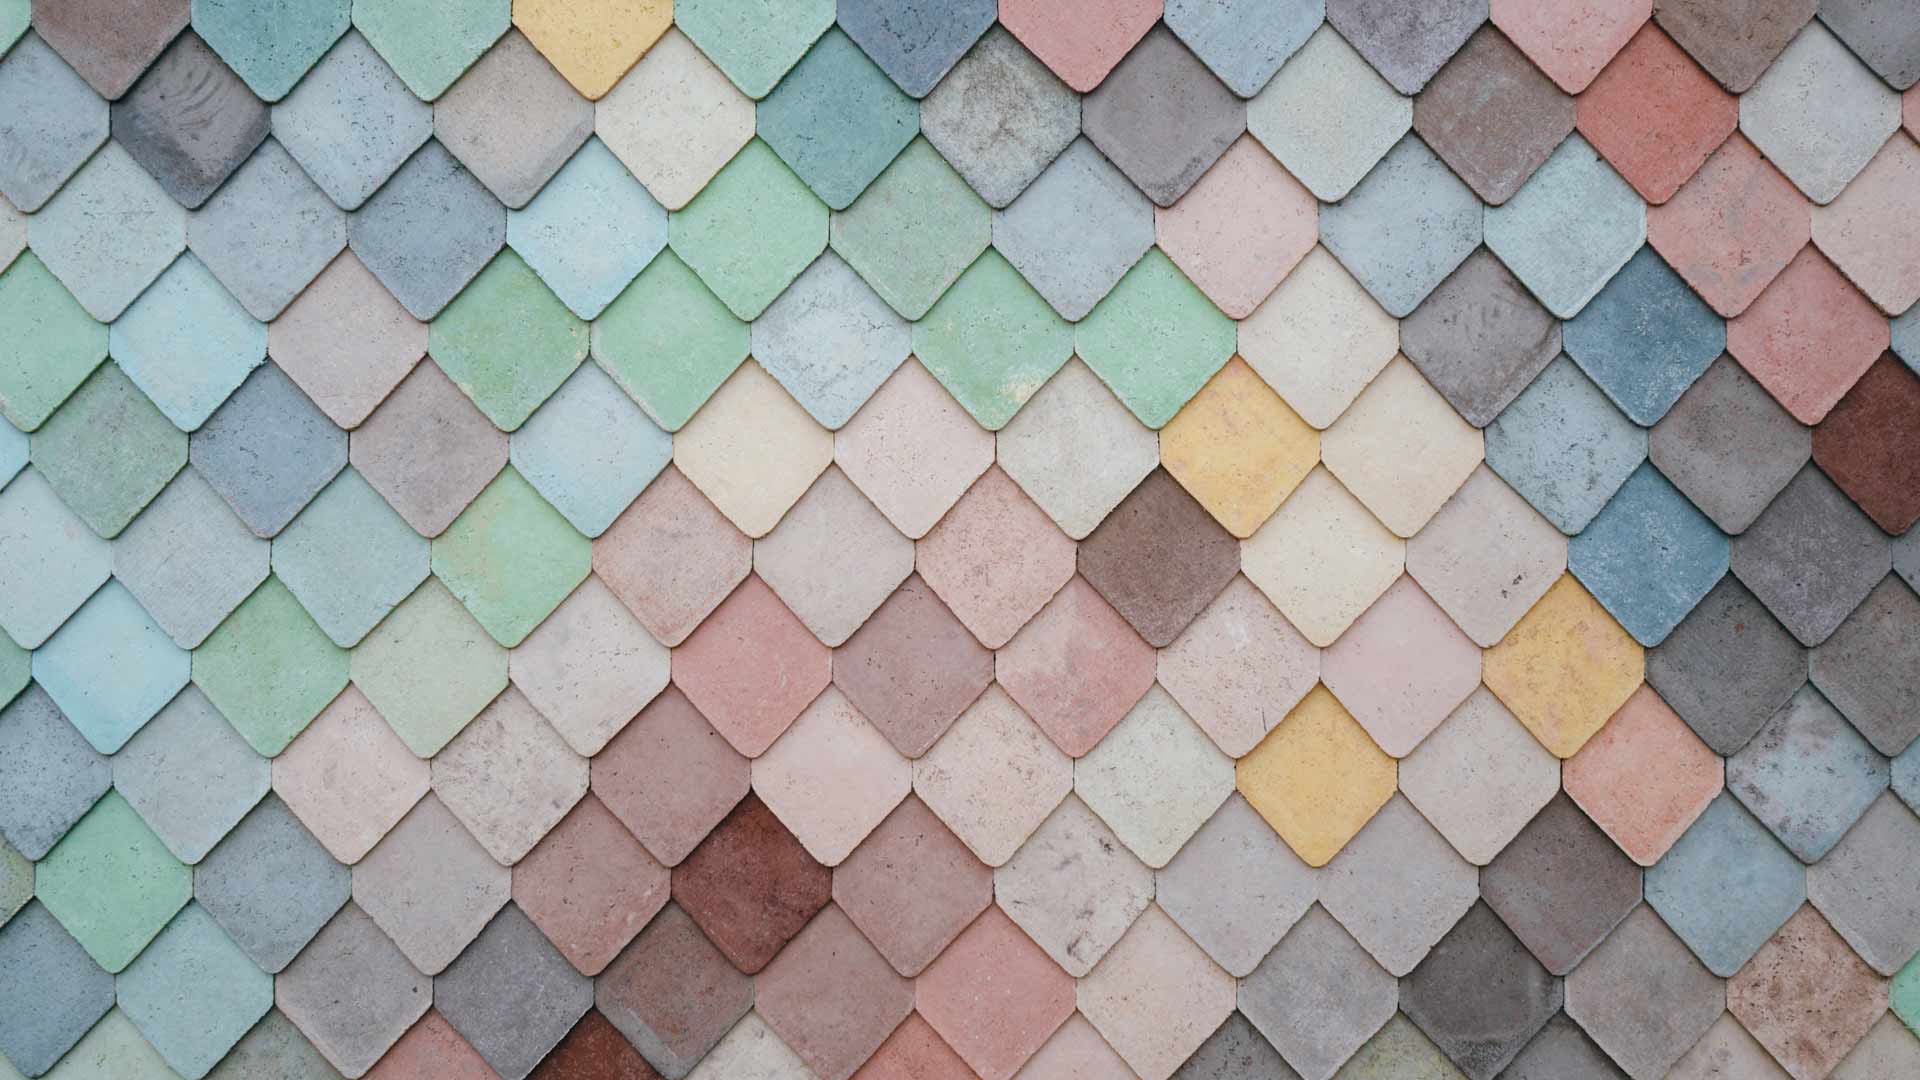 Hundreds of Painted Squares